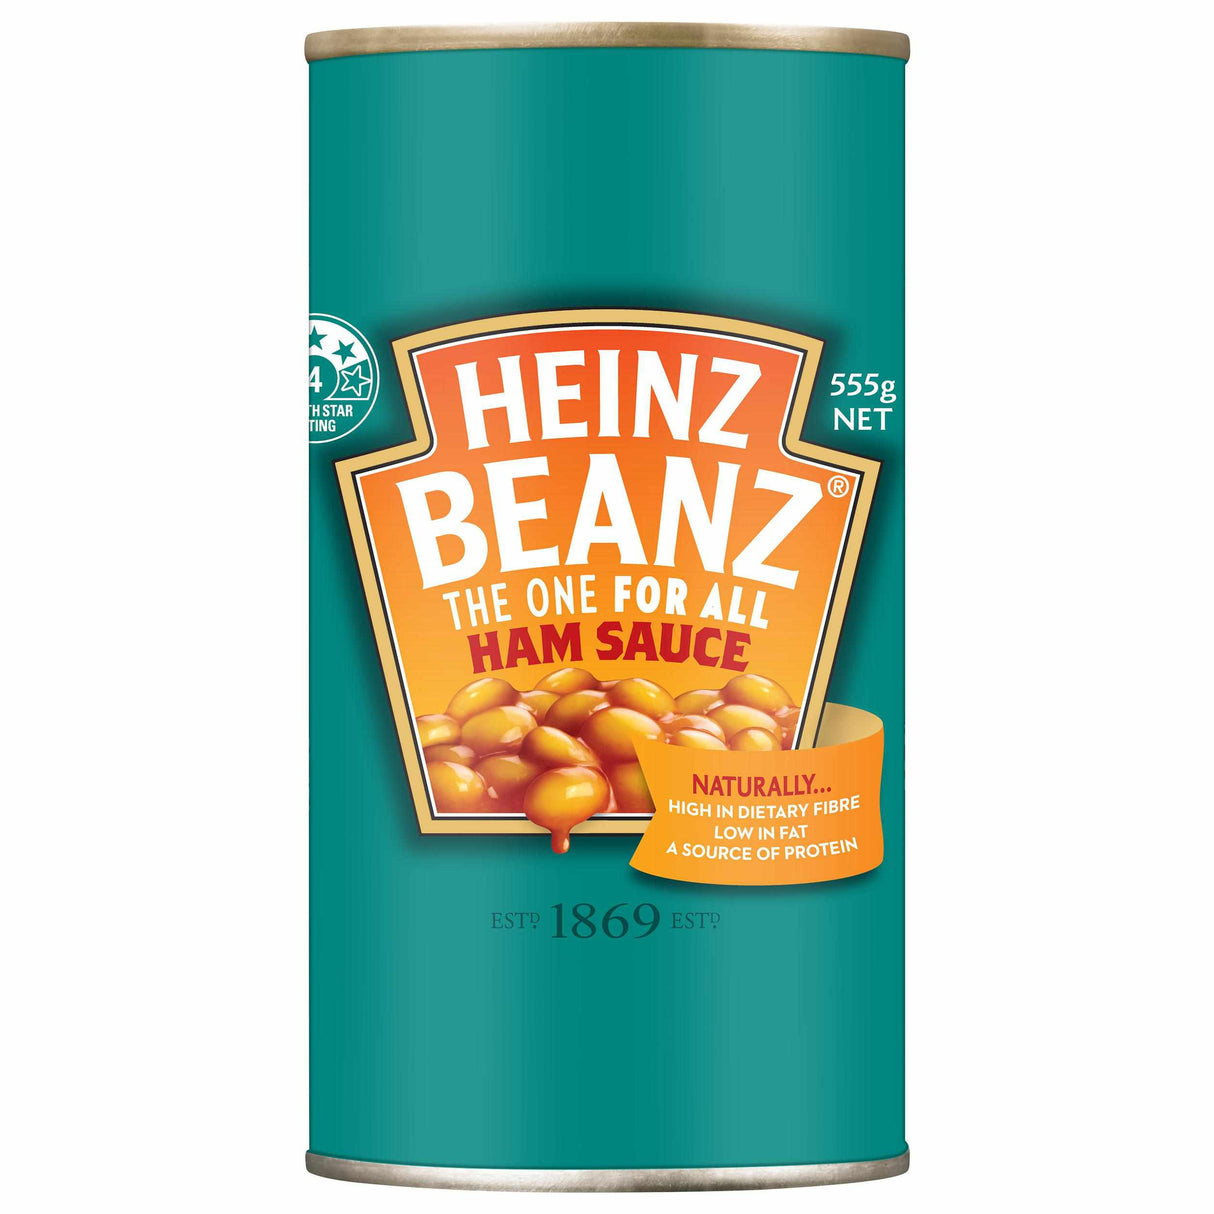 Heinz Beanz The One for All in Ham Sauce 555g